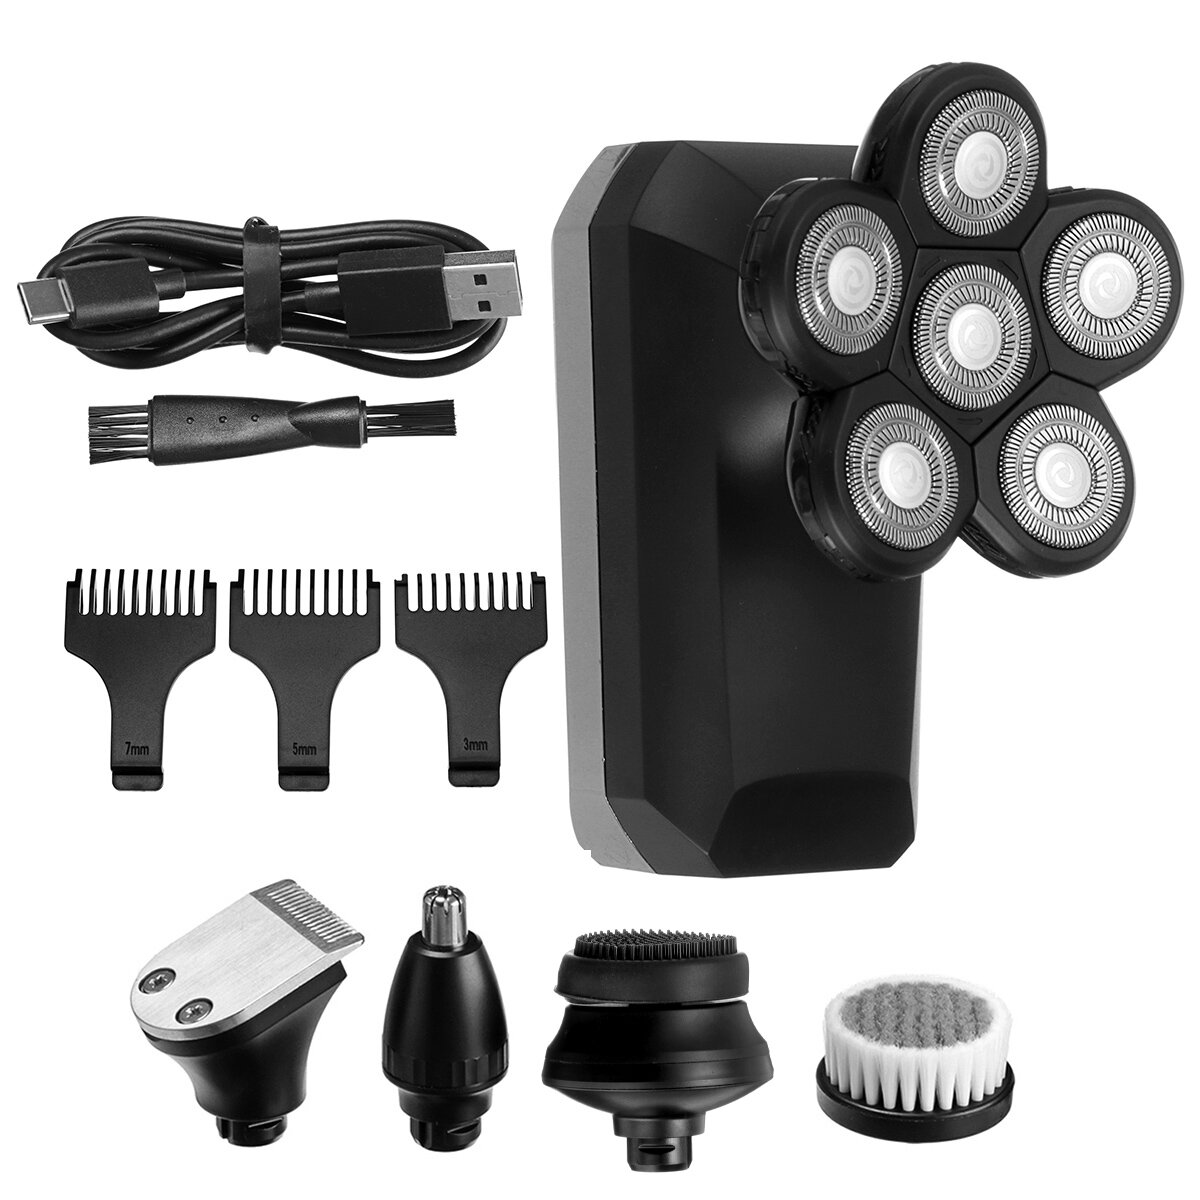 6 IN 1 6D Rotary Electric Shaver LED Display Men IPX7 Waterproof Nose Hair Trimmer Facial Cleaning Brush W/ 3pcs Limit C